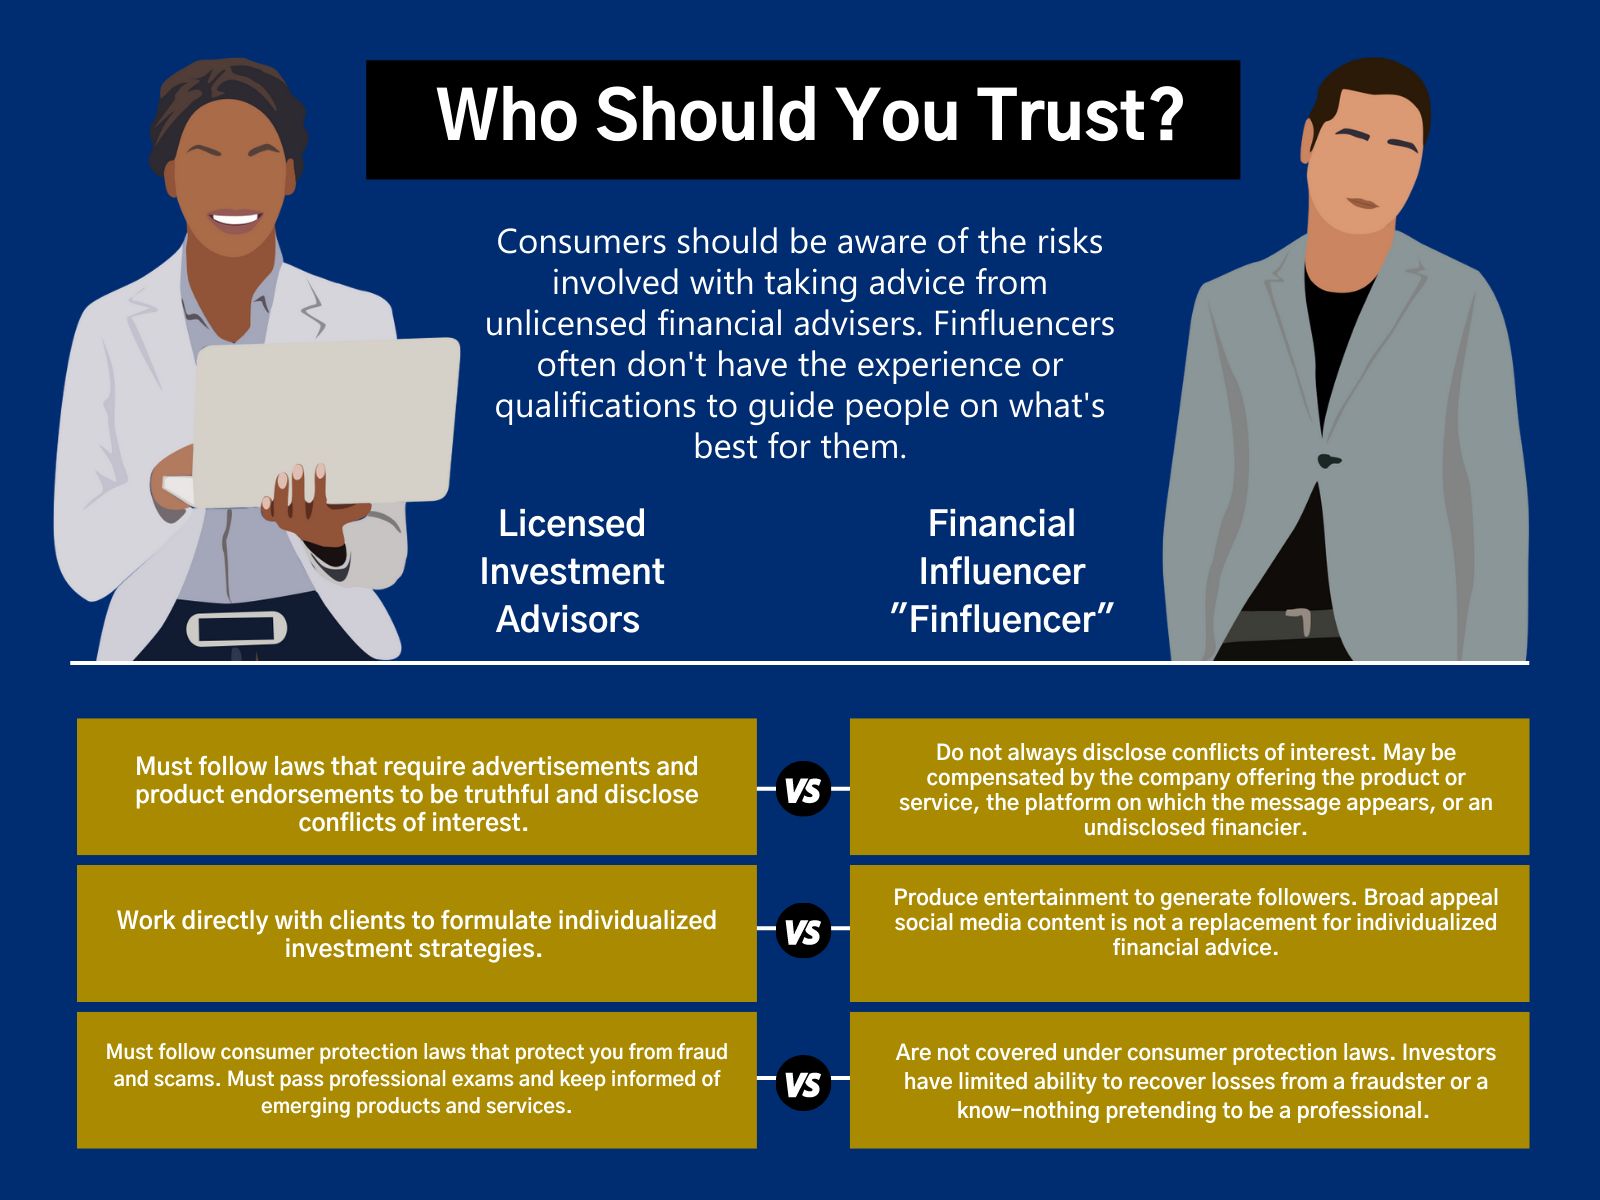 Who Should You Trust?  Consumers should be aware of the risks involved with taking advice from unlicensed financial advisers. Finfluencers often don't have the experience or qualifications to guide people on what's best for them.  Licensed Investment Advisors   Must follow laws that require advertisements and product endorsements to be truthful and disclose conflicts of interest.  Work directly with clients to formulate individualized investment strategies.  Must follow consumer protection laws that protect you from fraud and scams. Must pass professional exams and keep informed of emerging products and services.  Financial  Influencer  "Finfluencer"   Do not always disclose conflicts of interest. May be compensated by the company offering the product or service, the platform on which the message appears, or an undisclosed financier.  Produce entertainment to generate followers. Broad appeal social media content is not a replacement for individualized financial advice.  Are not covered under consumer protection laws. Investors have limited ability to recover losses from a fraudster or a know-nothing pretending to be a professional. 